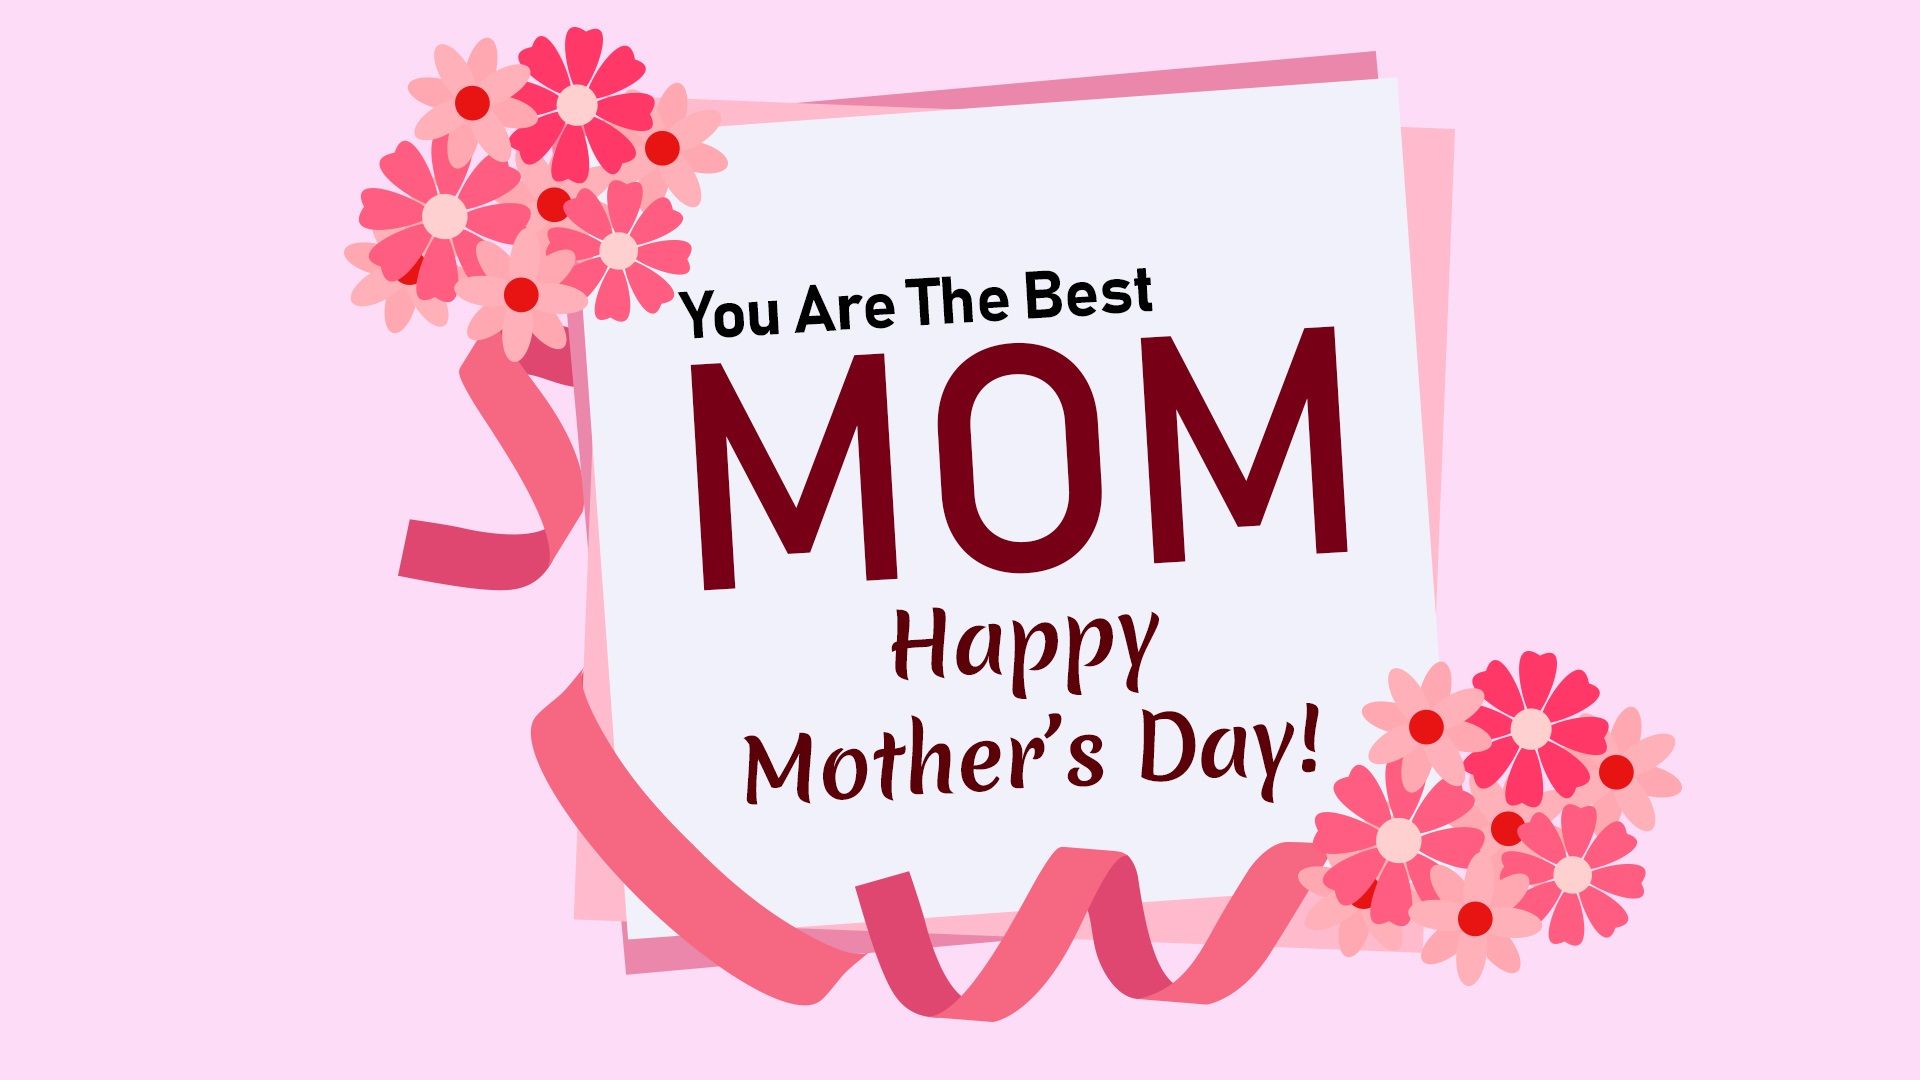 Happy Mothers Day 2021 Quotes Image, And Memes